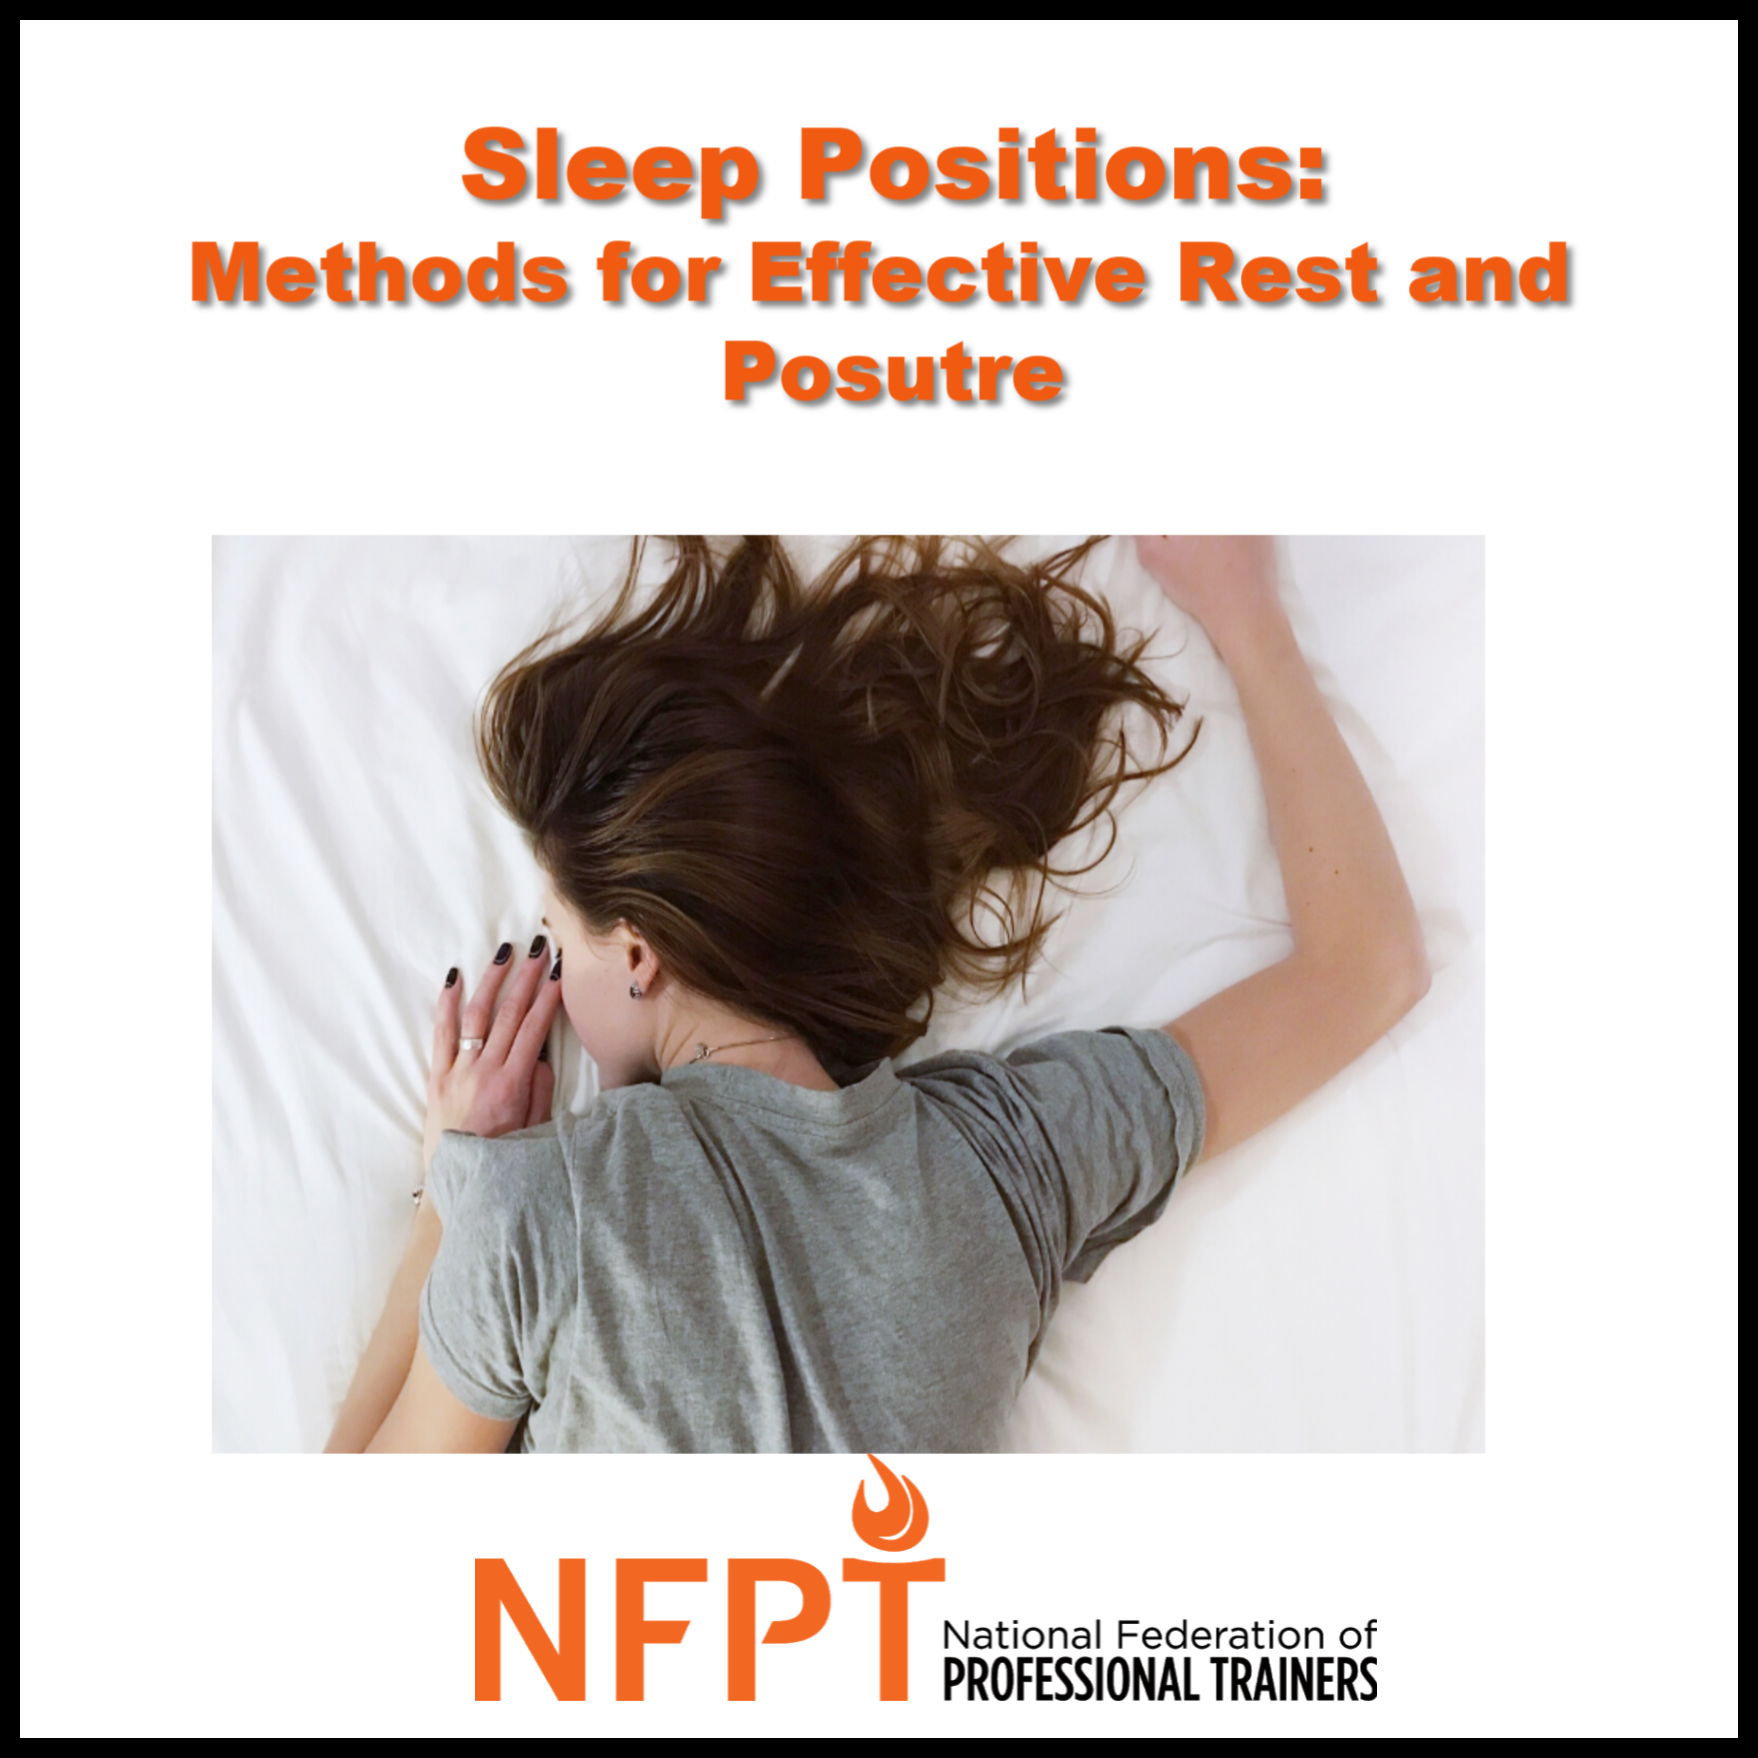 Sleep Positions: Methods for Effective Rest and Posture